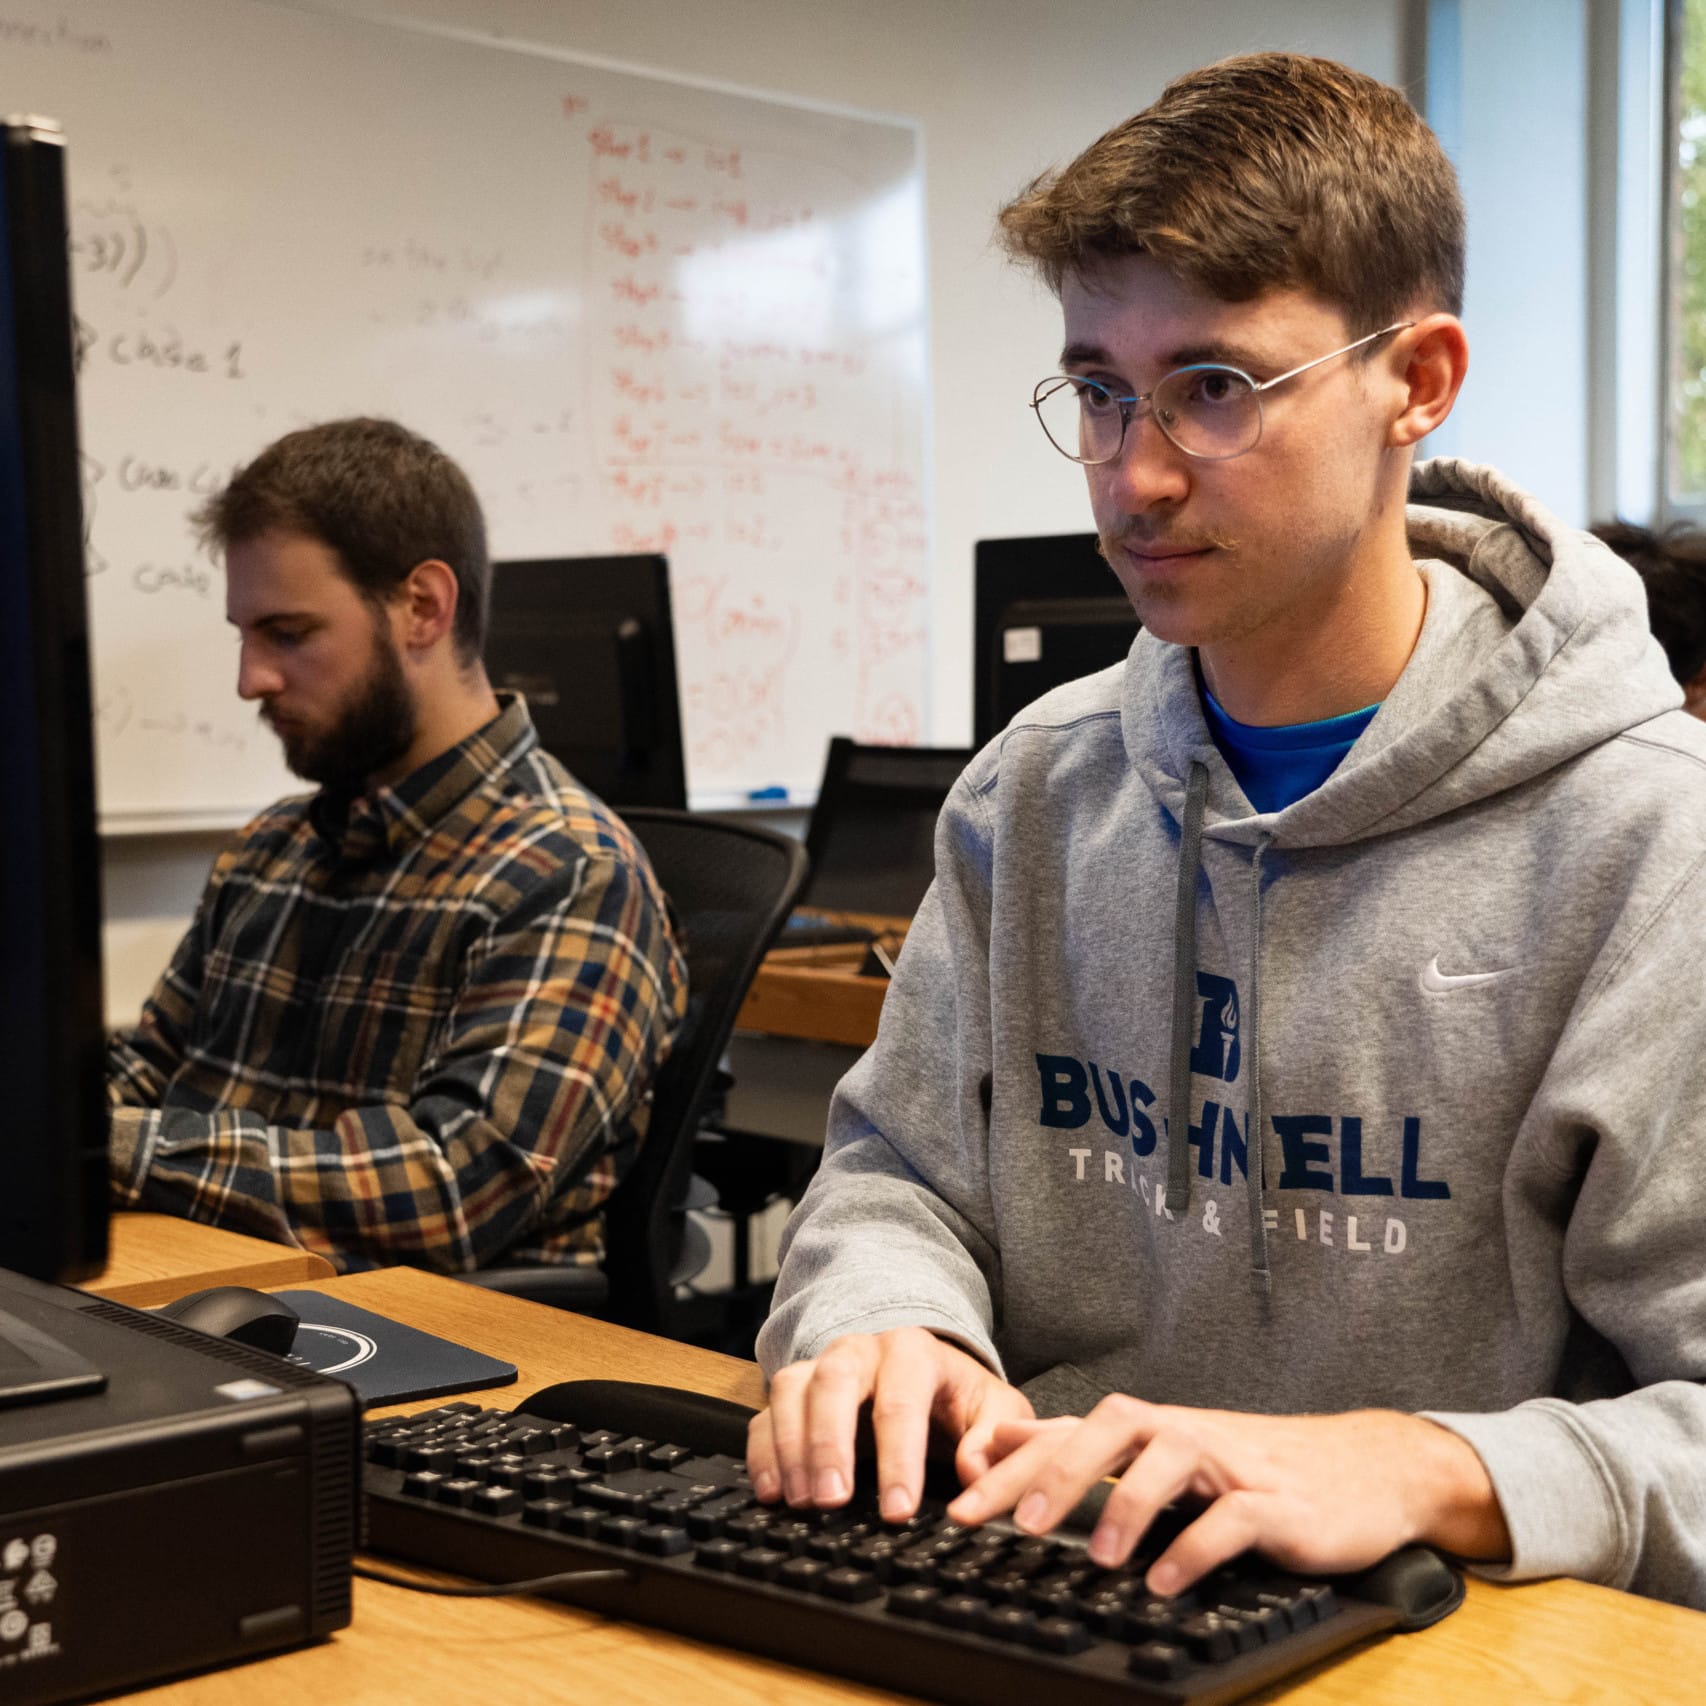 Male students on computers